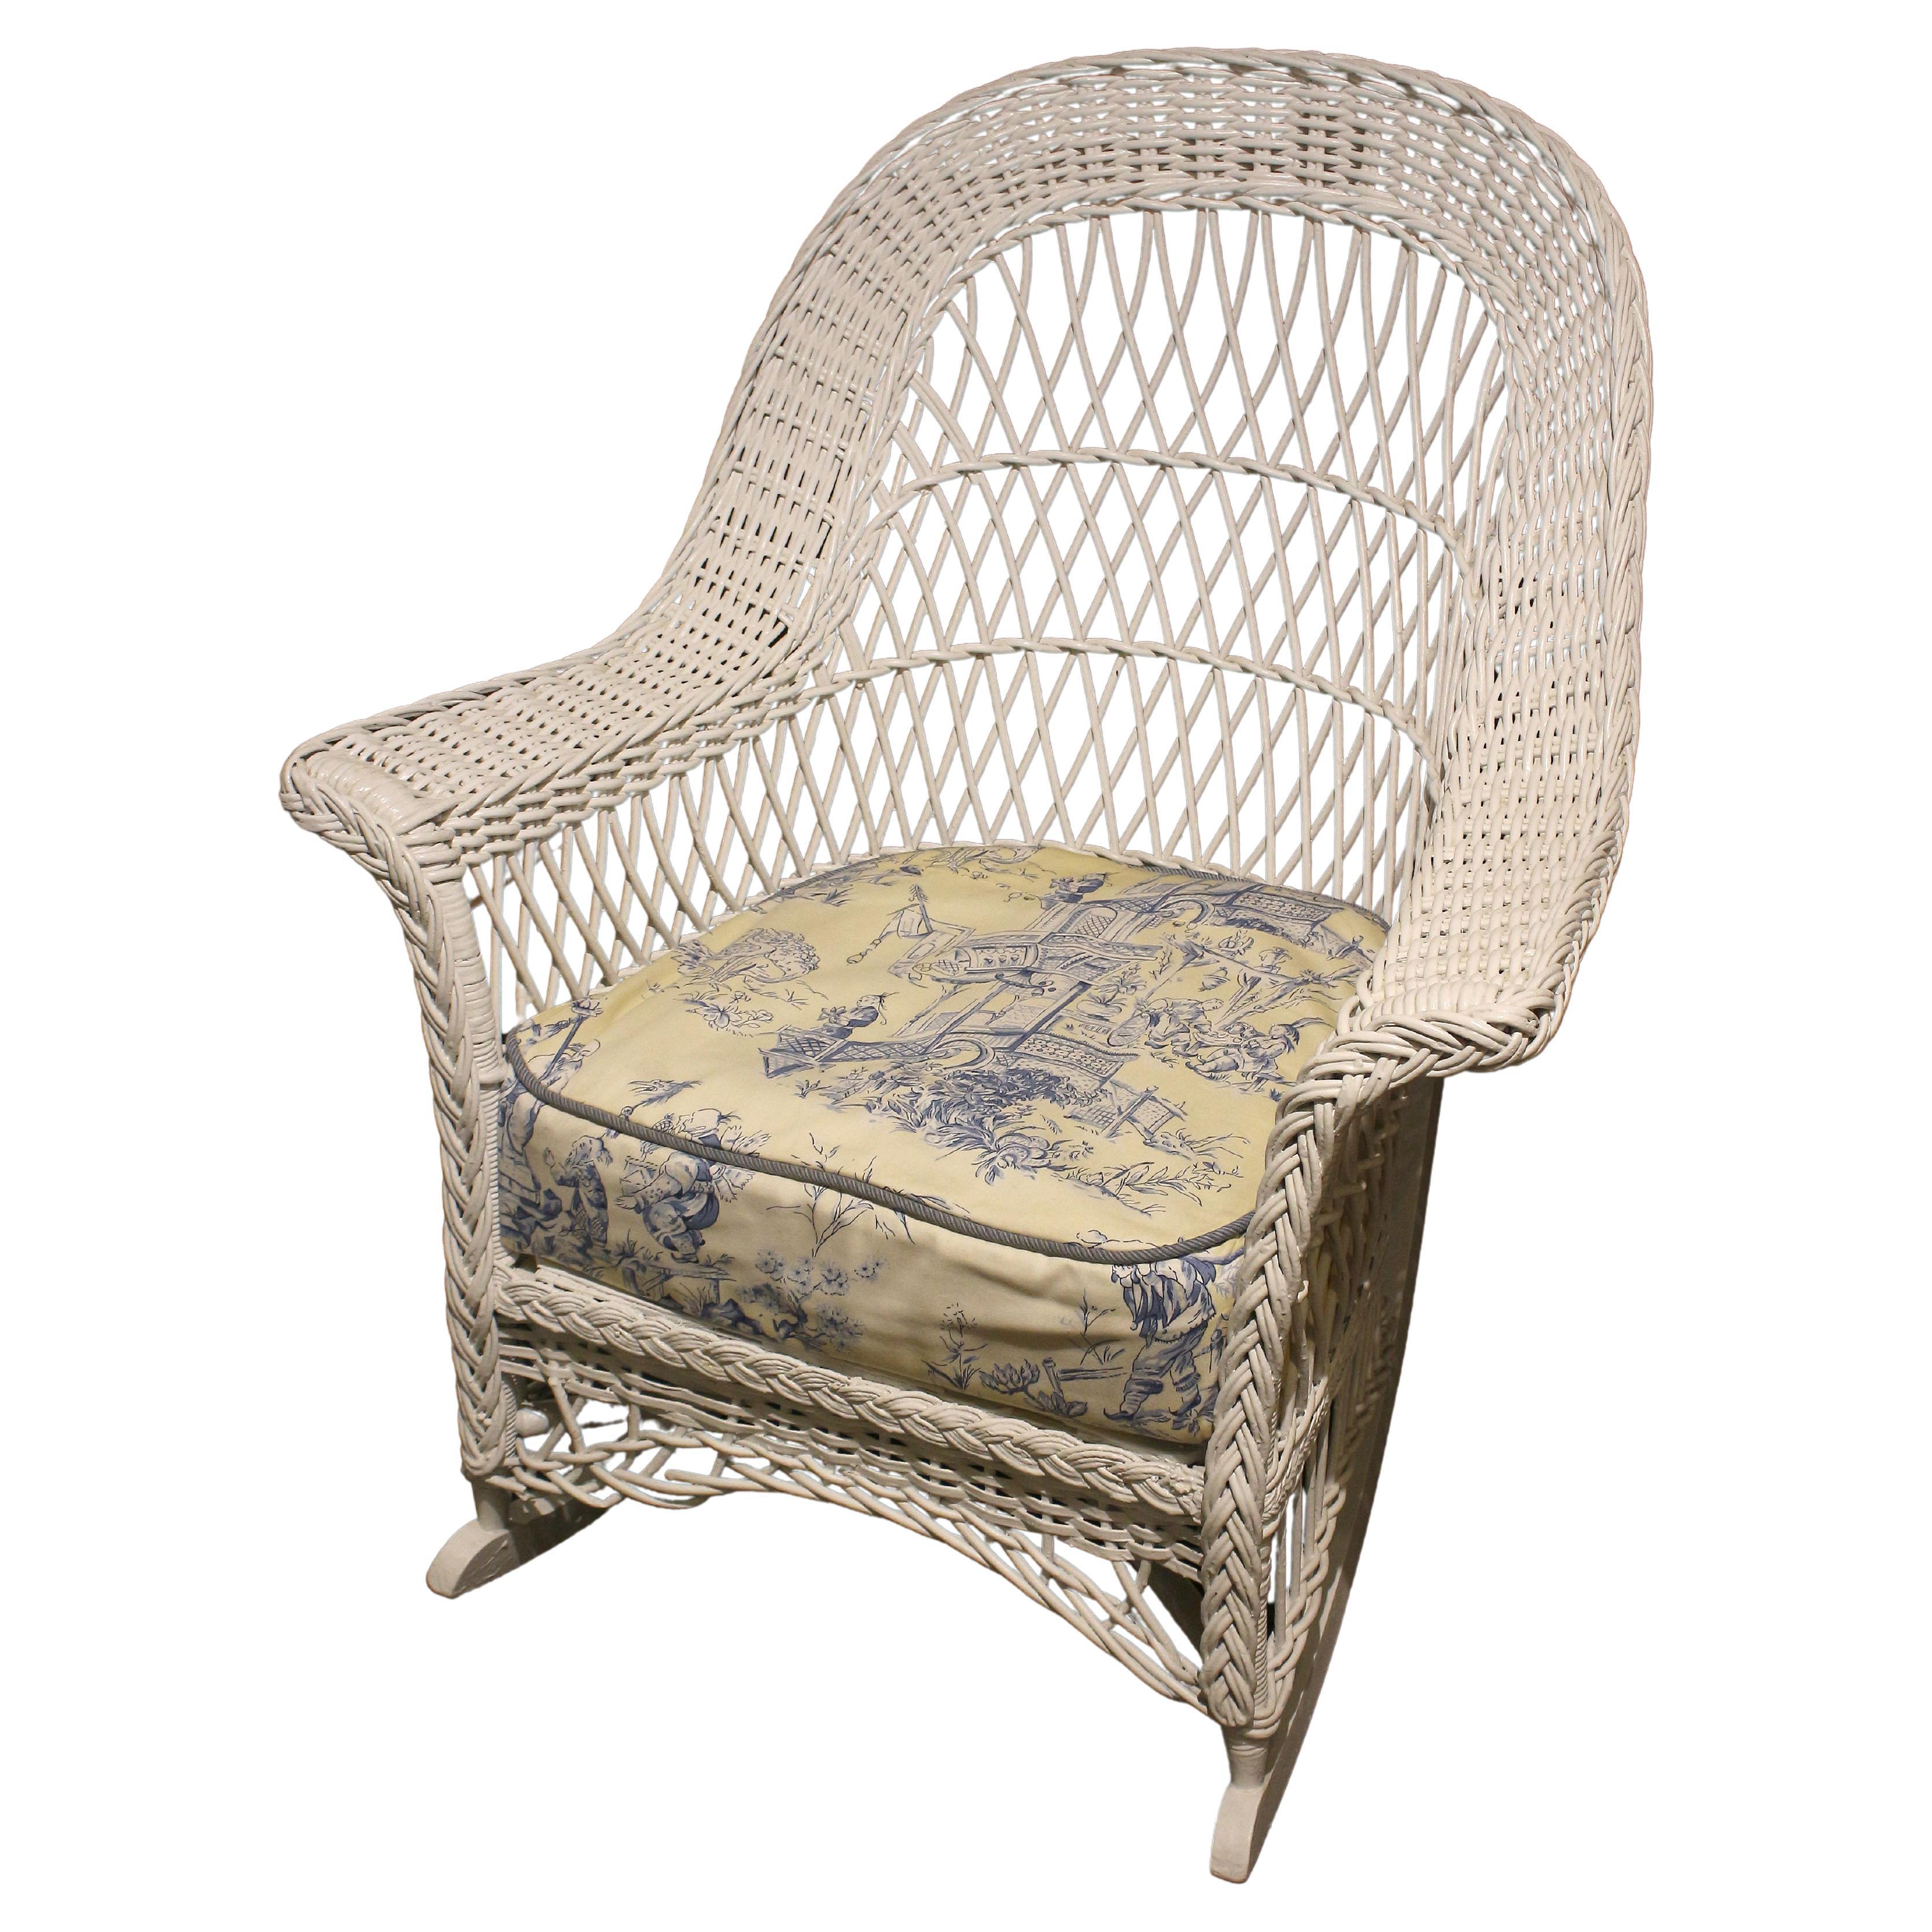 Early 20th Century Heywood-Wakefield Bar Harbor Wicker Rocking Chair For Sale